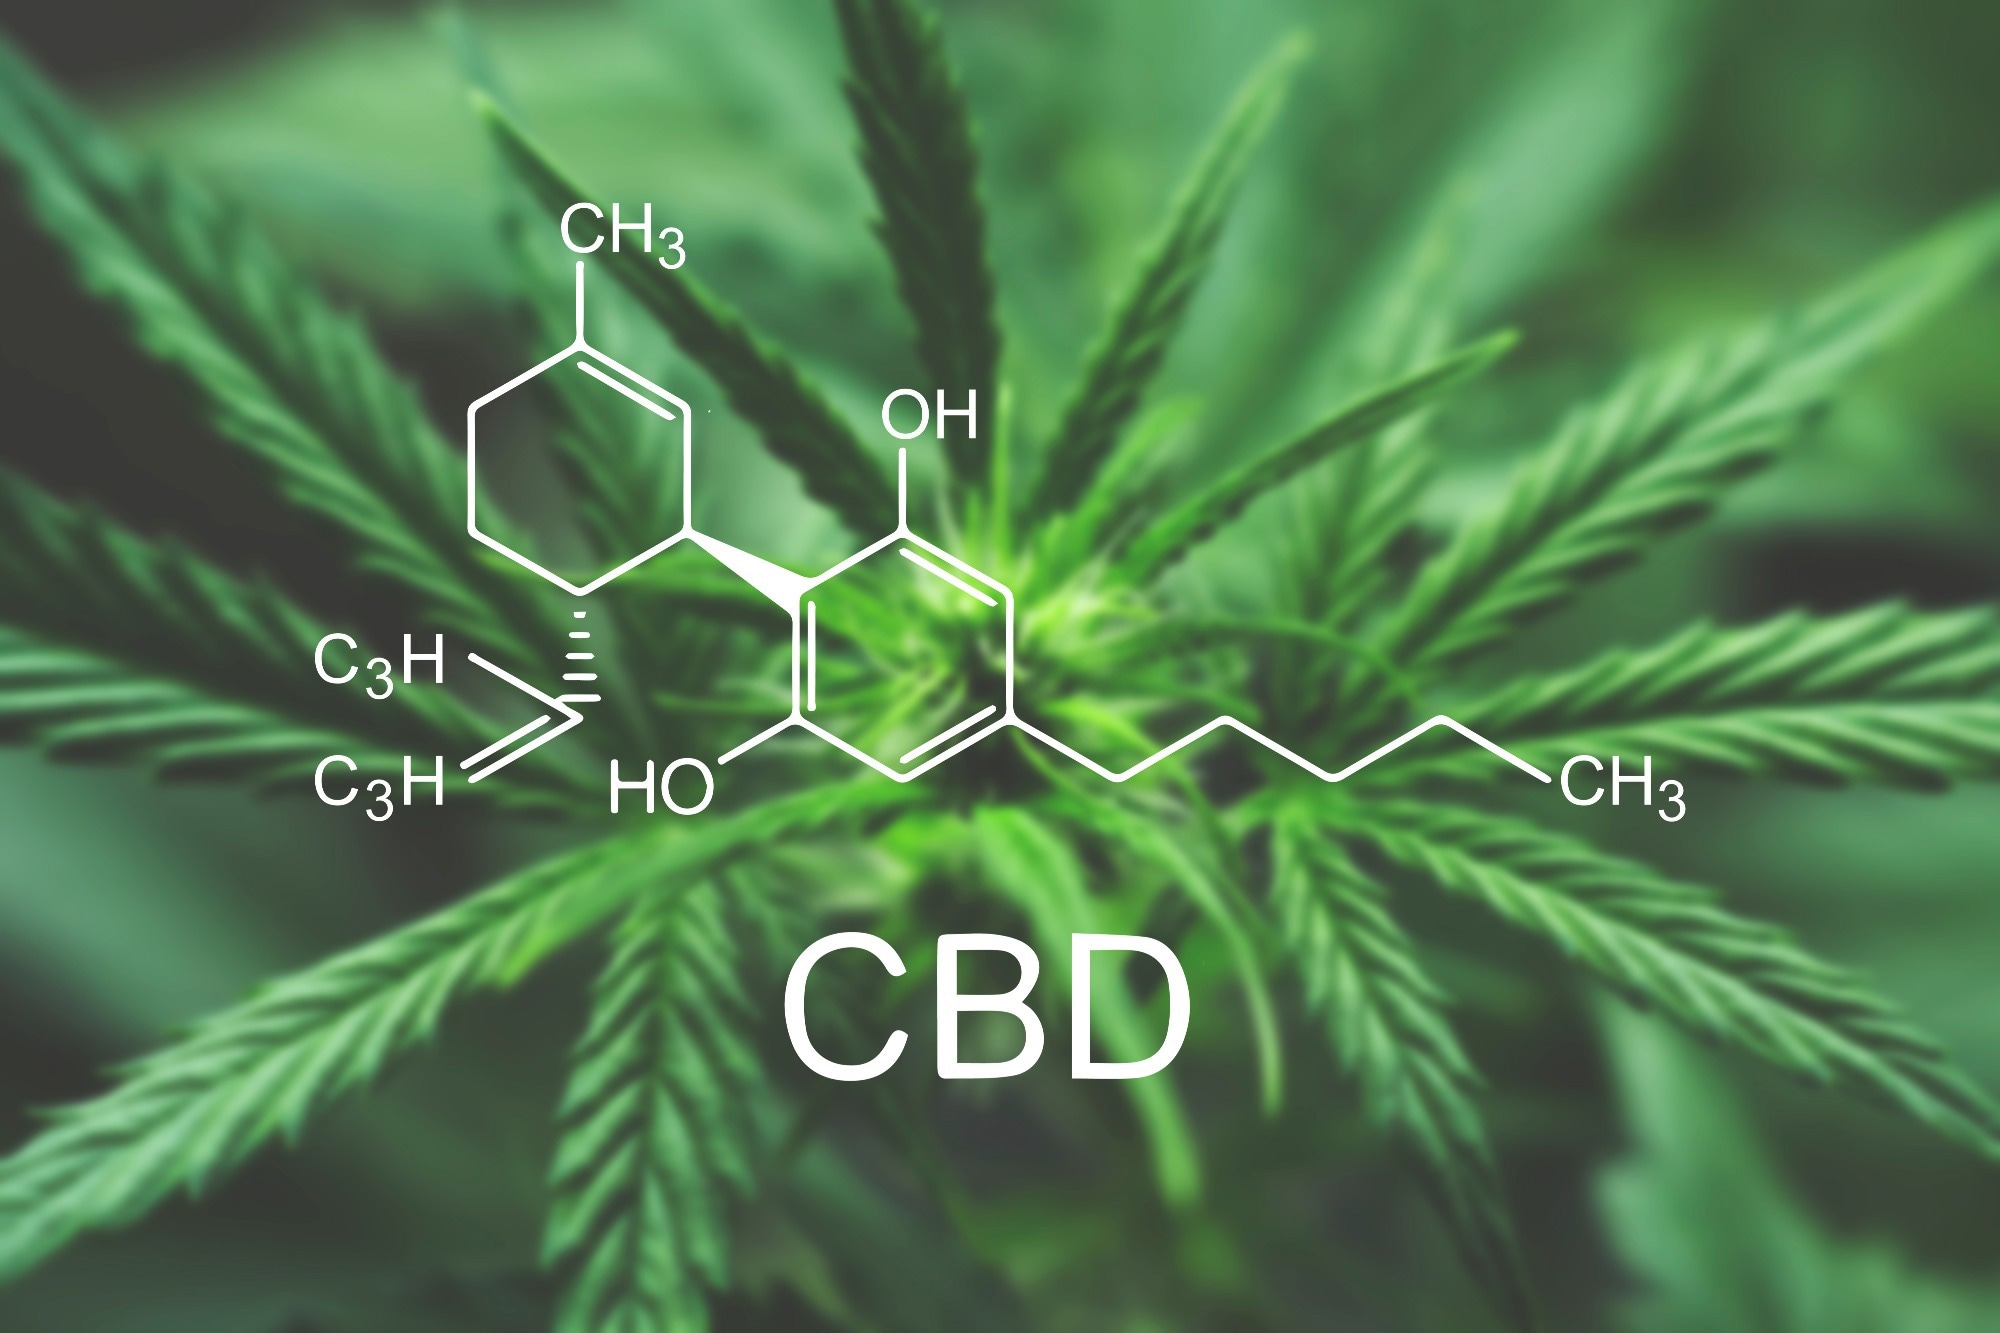 Study: Review of the oral toxicity of cannabidiol (CBD). Image Credit: DmytroTyshchenko/Shutterstock.com